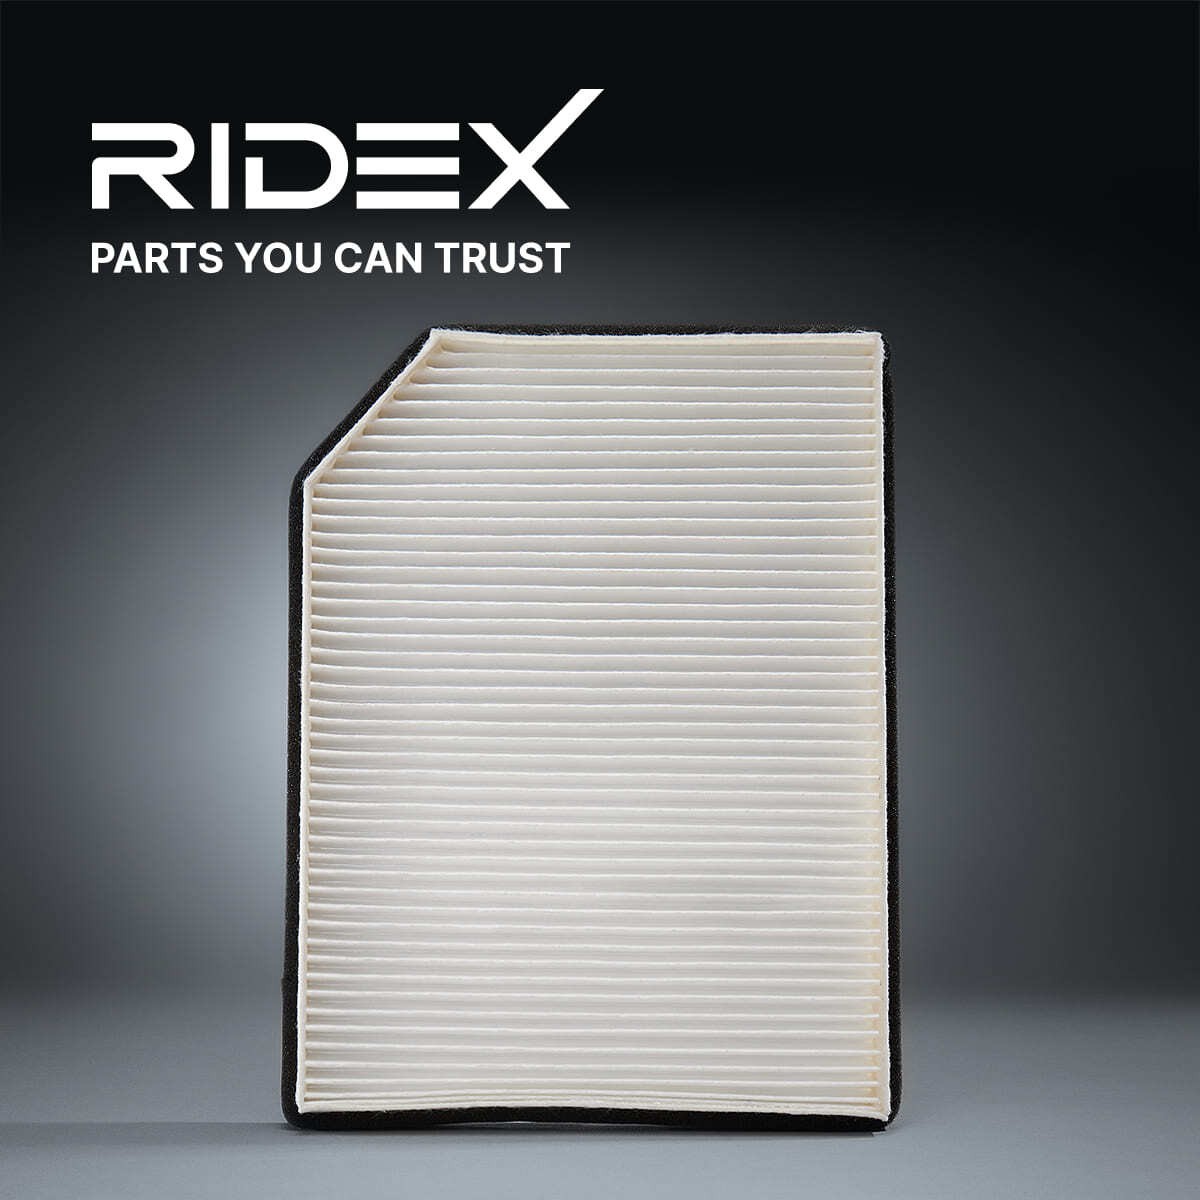 RIDEX 424I0208 Air conditioner filter Activated Carbon Filter, 405 mm x 166 mm x 32 mm